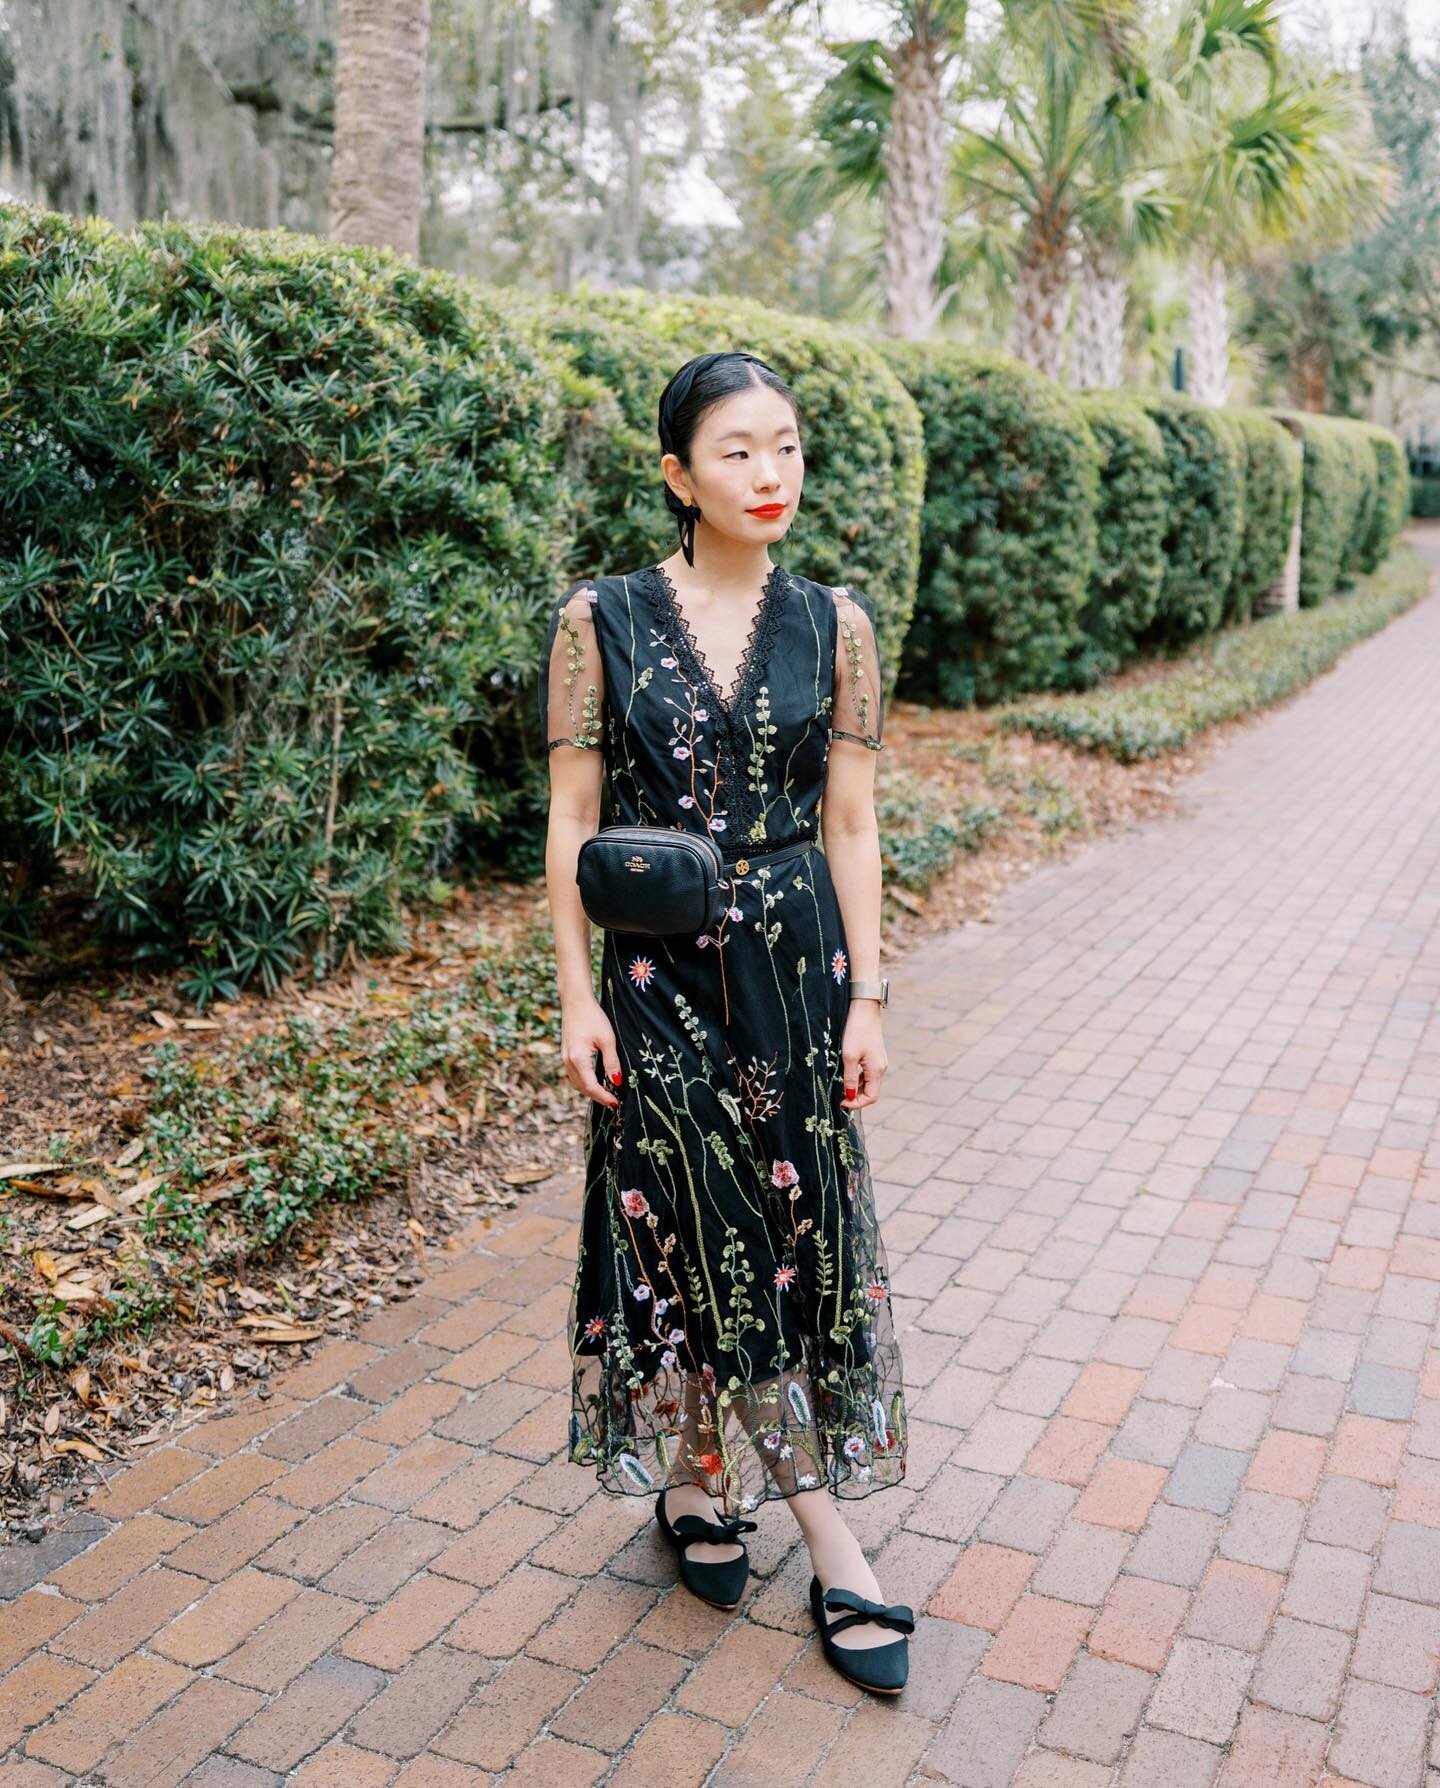 Today, I'm sharing something a bit different in terms of outfit inspiration: my style while working weddings and events! I've had friends and colleagues mention that I should share more on this topic but I always forget to snap a photo while I'm on-s